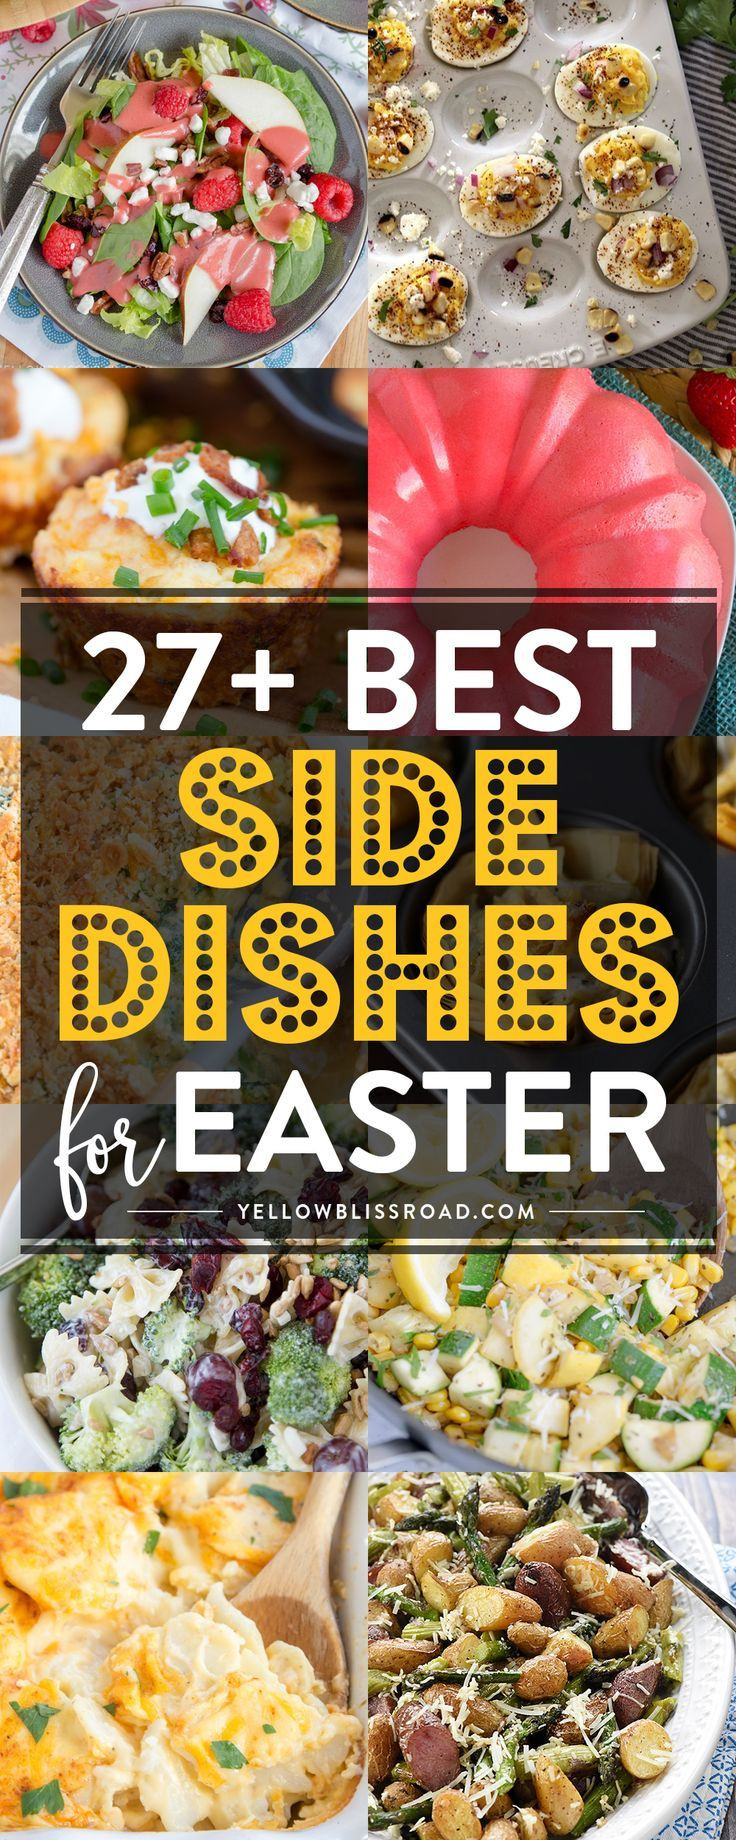 Side Dishes For Easter Dinner Ideas
 25 best ideas about Easter Dishes on Pinterest